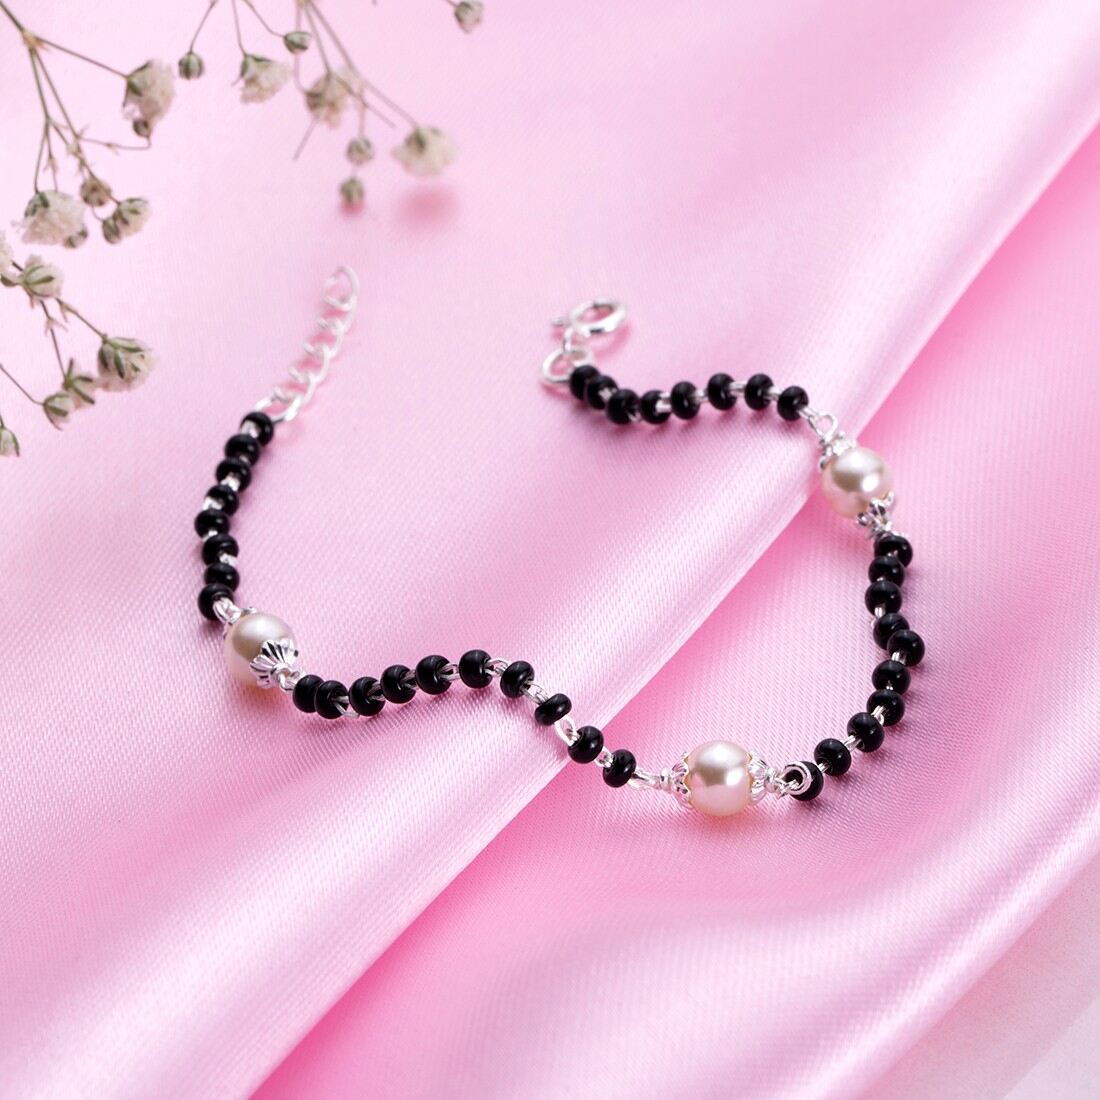 Elegant Harmony 925 Sterling Silver Bracelet with Bead and Pearl Accent